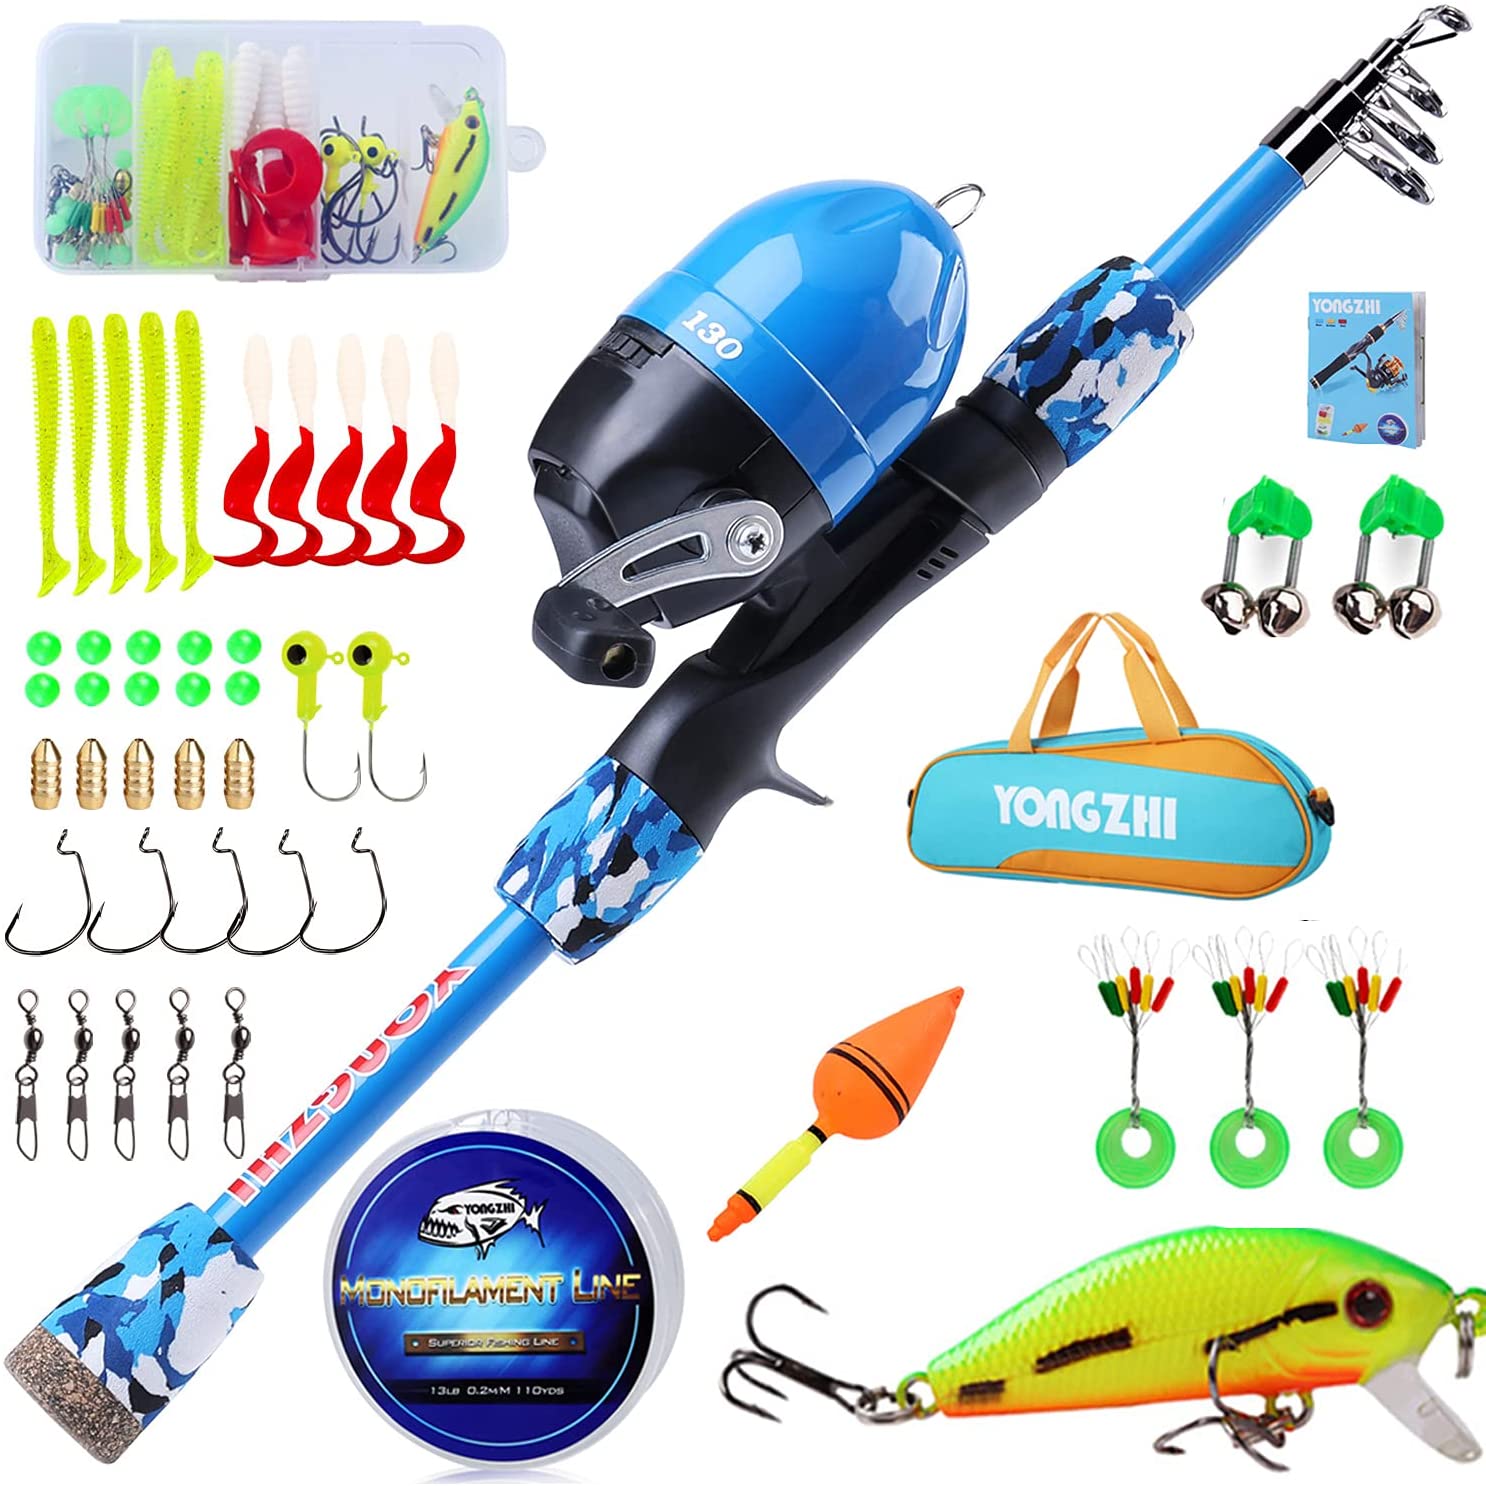 ODDSPRO Kids Fishing Pole Portable Telescopic Fishing Rod and Reel Combo Kit - with Spincast Fishing Reel Tackle Box for Boys Girls Youth, Blue